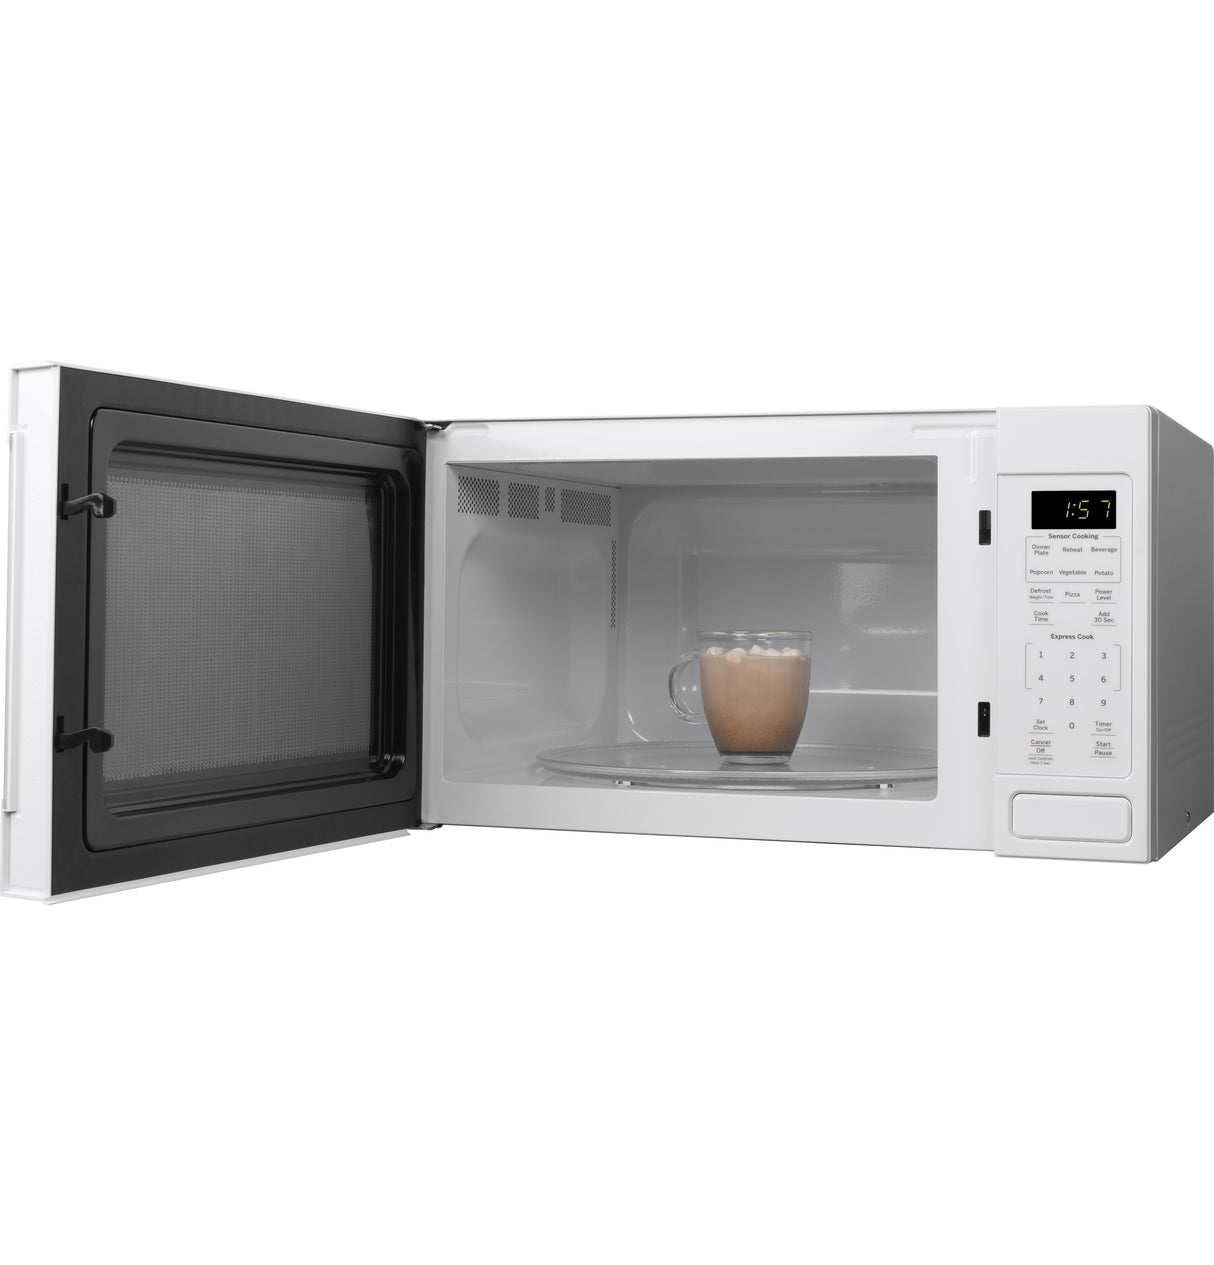 GE(R) 1.6 Cu. Ft. Countertop Microwave Oven - (JES1657DMWW)